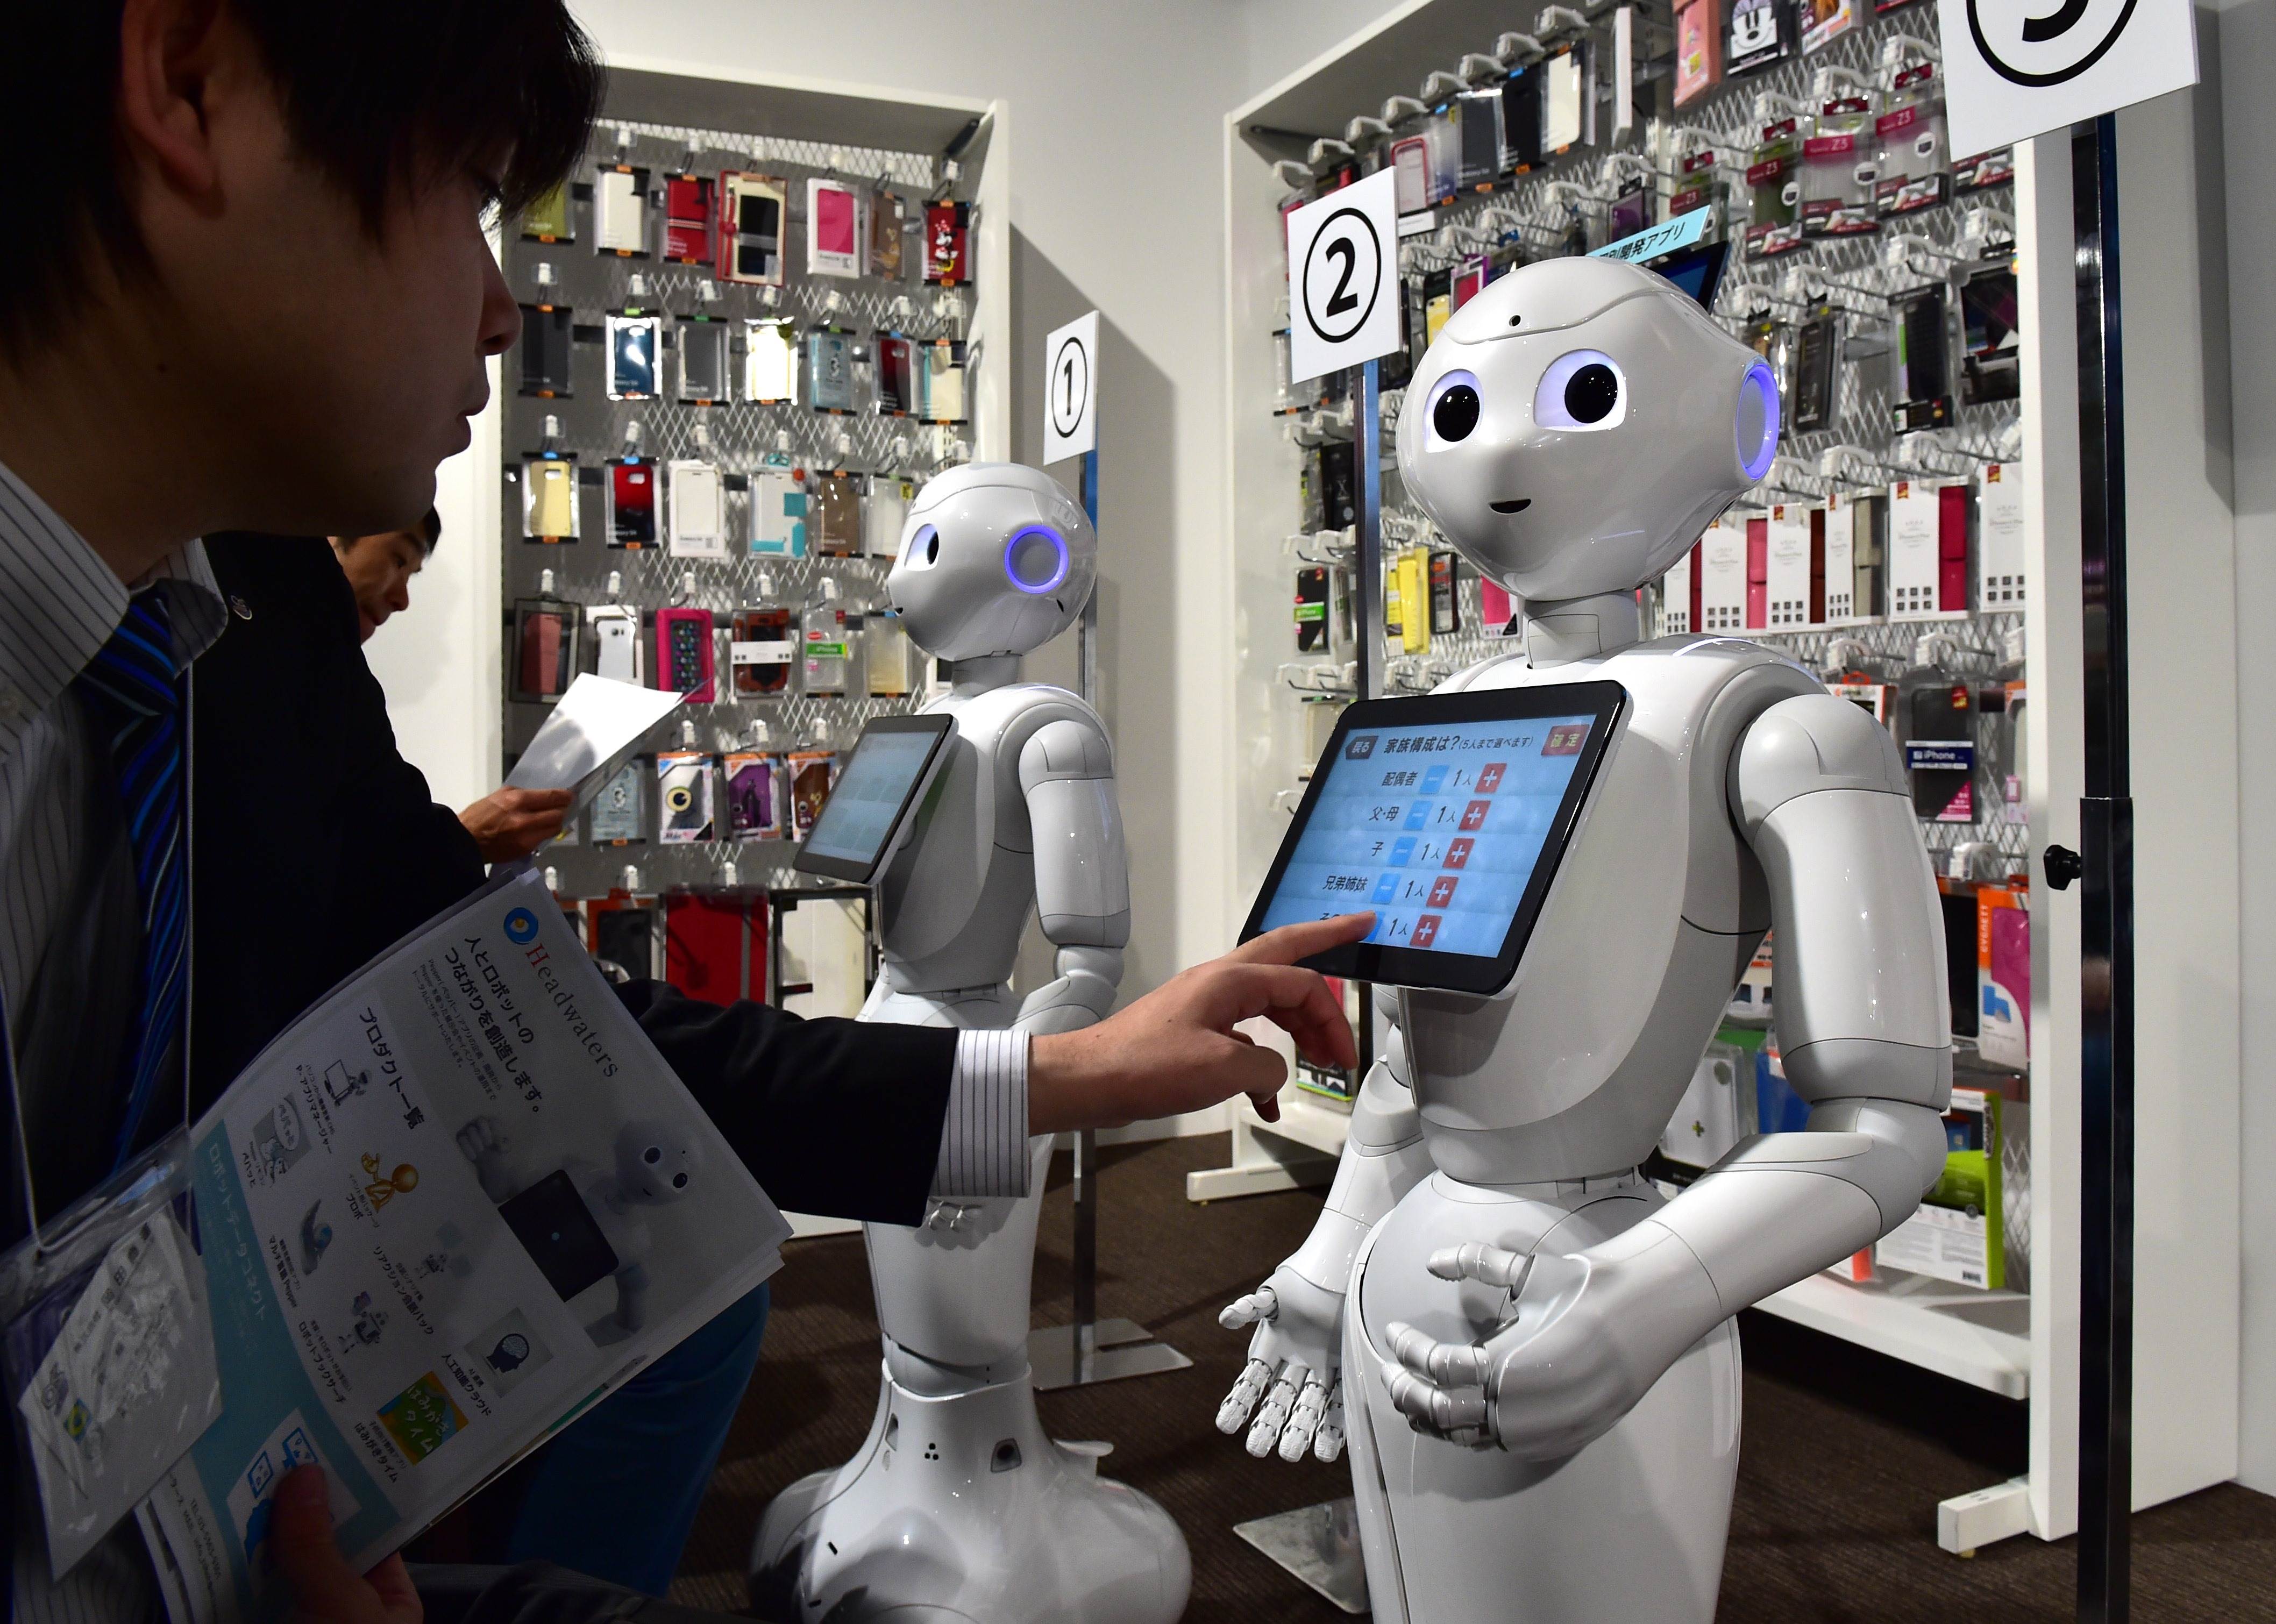 "Pepper", humanoid robots from Japan's telecommunication giant Softbank, are displayed at a smartphone stall to illustrate their applications for corporate use at the "Pepper World" exhibition in Tokyo on January 28, 2016. Softbank announced the company will open a pop-up smartphone shop in Tokyo next month as five Peppers will sell the smartphones to display their skills for customer services. AFP PHOTO / Yoshikazu TSUNO